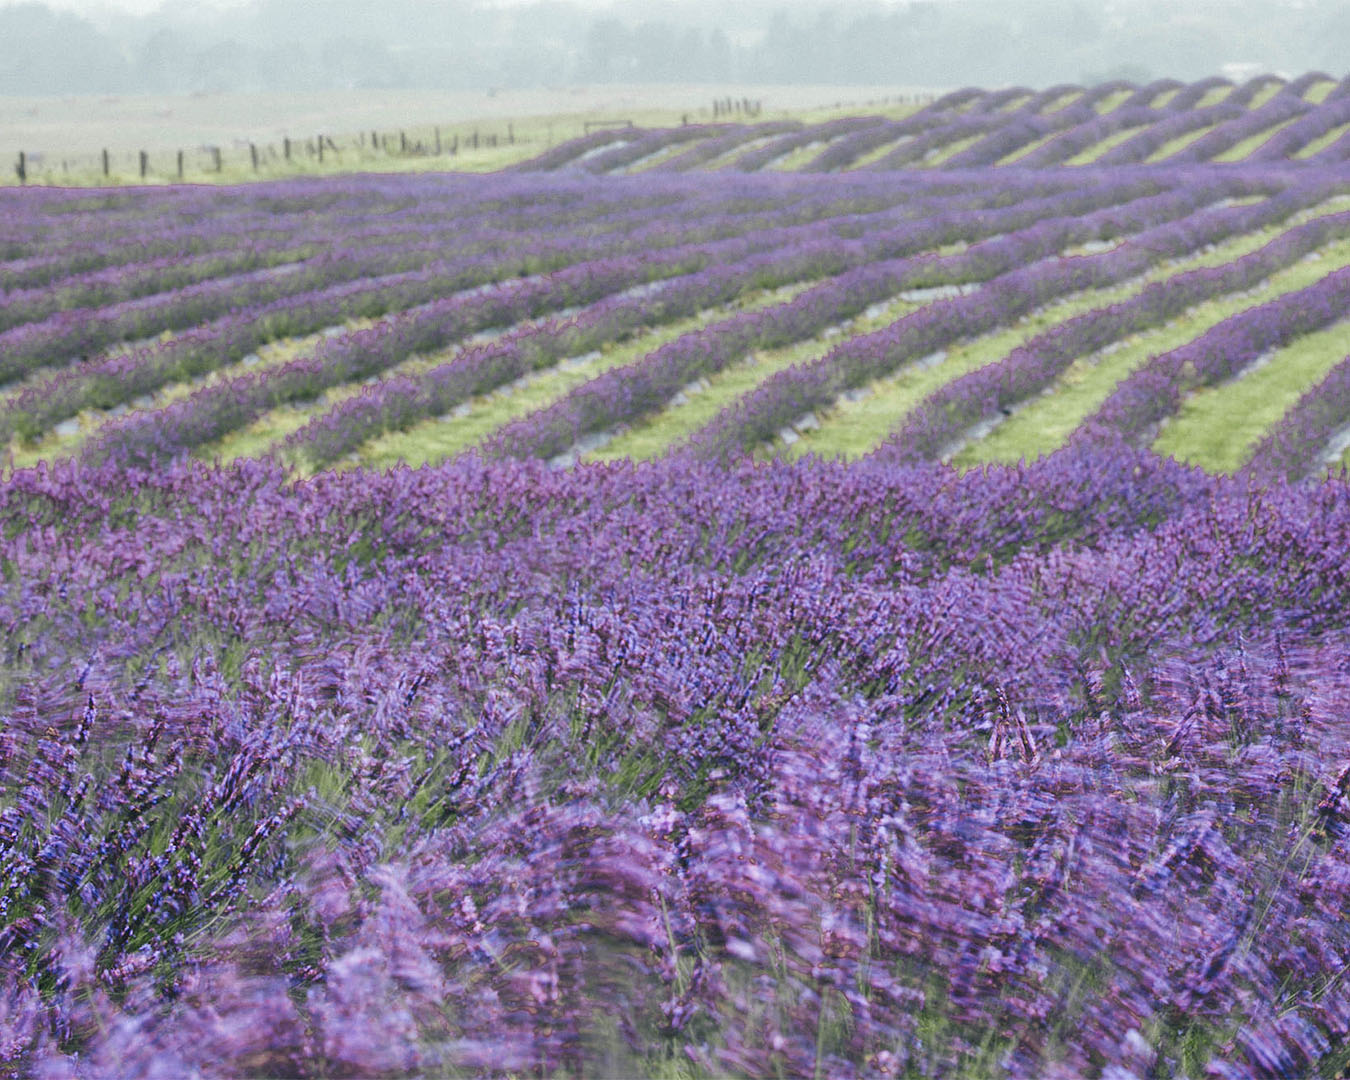 Rows upon rows of lovely lavender stretches into the distance.